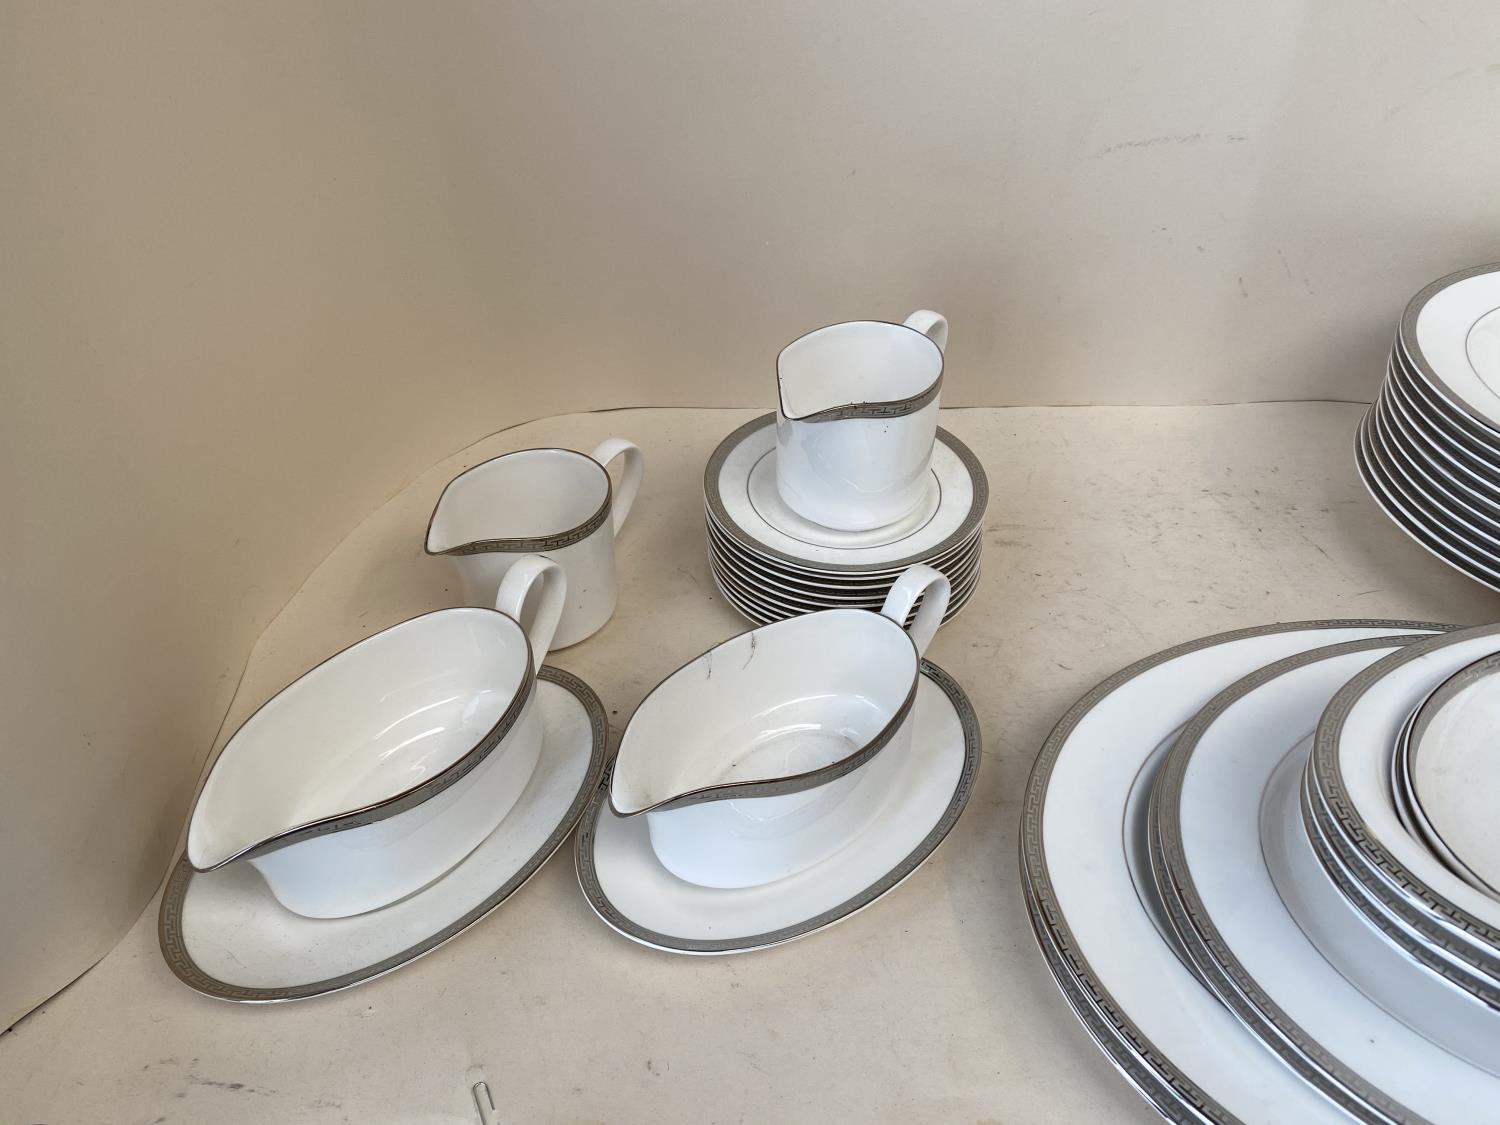 Royal Worcester Corinth Platinum modern dinner service, 10 place setting plus platters and dishes, - Image 6 of 6